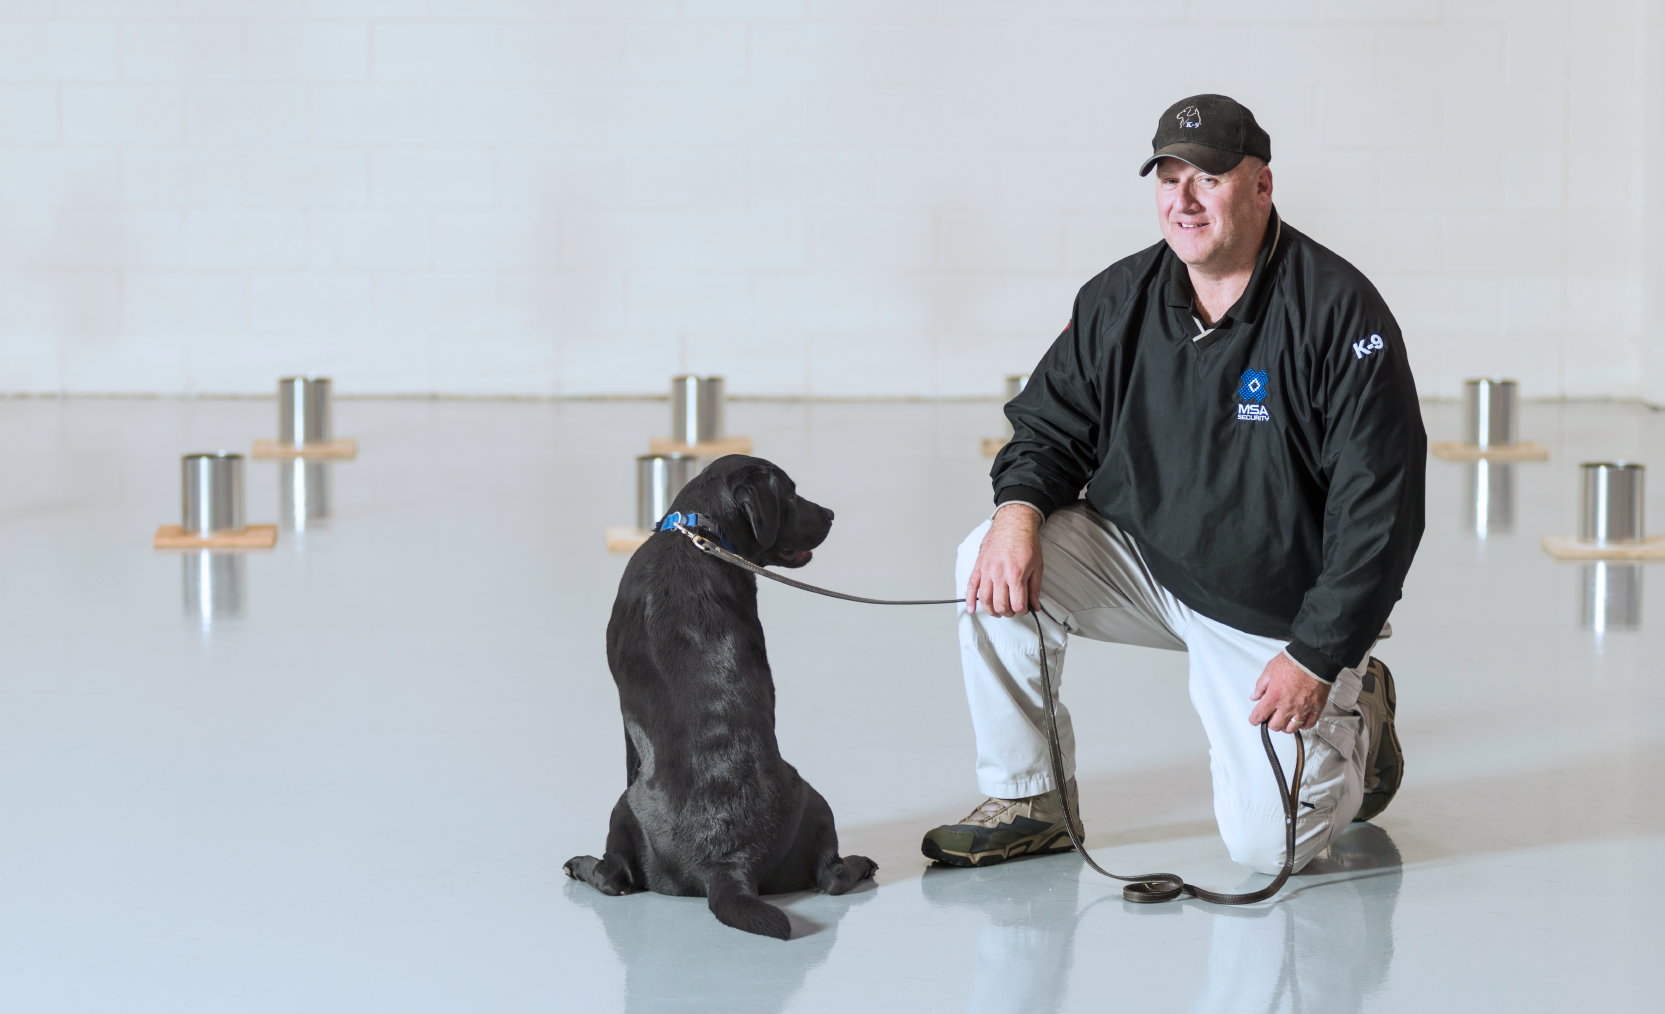 black labrador retriever and handler sitting in training facility surrounded by explosive training devices